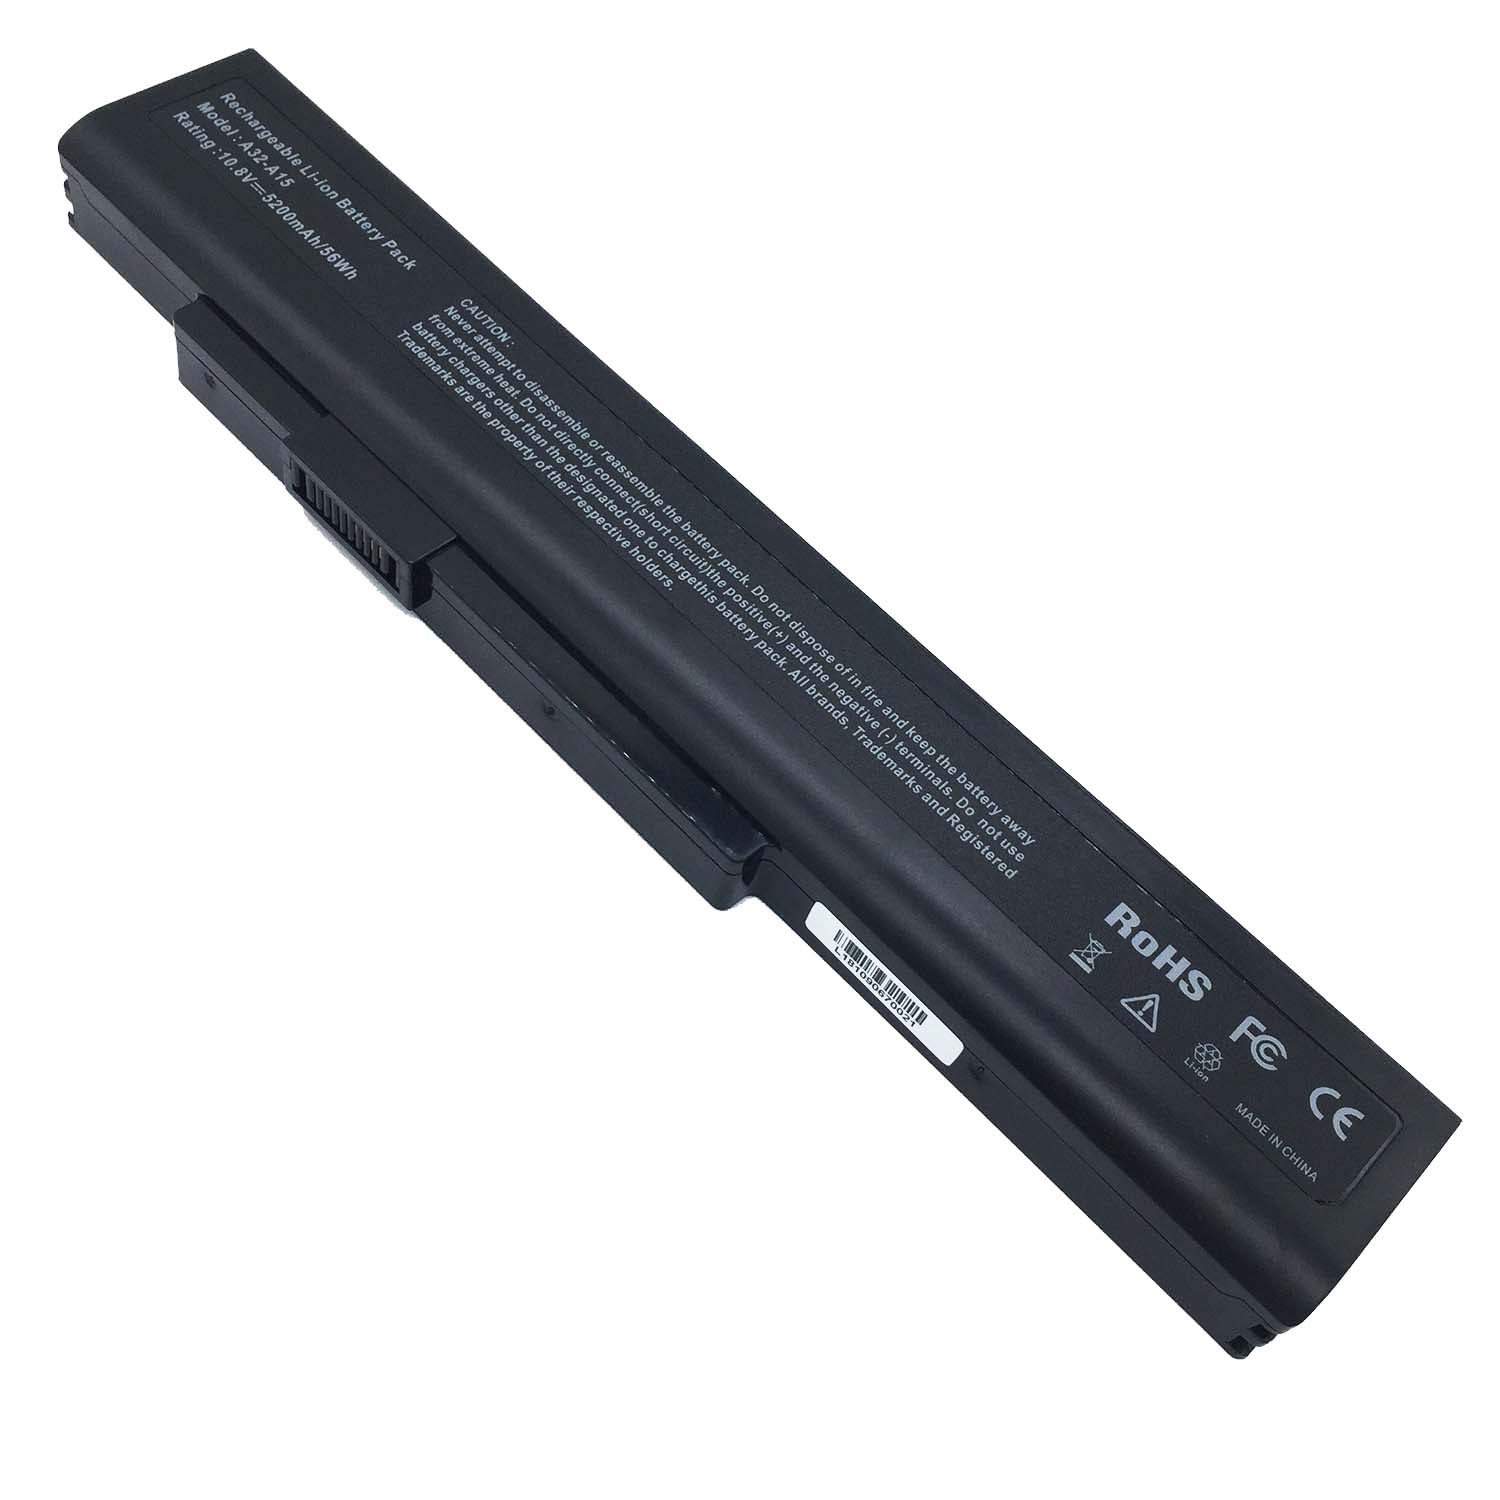 Replacement Battery for Medion Medion Akoya E6228 battery